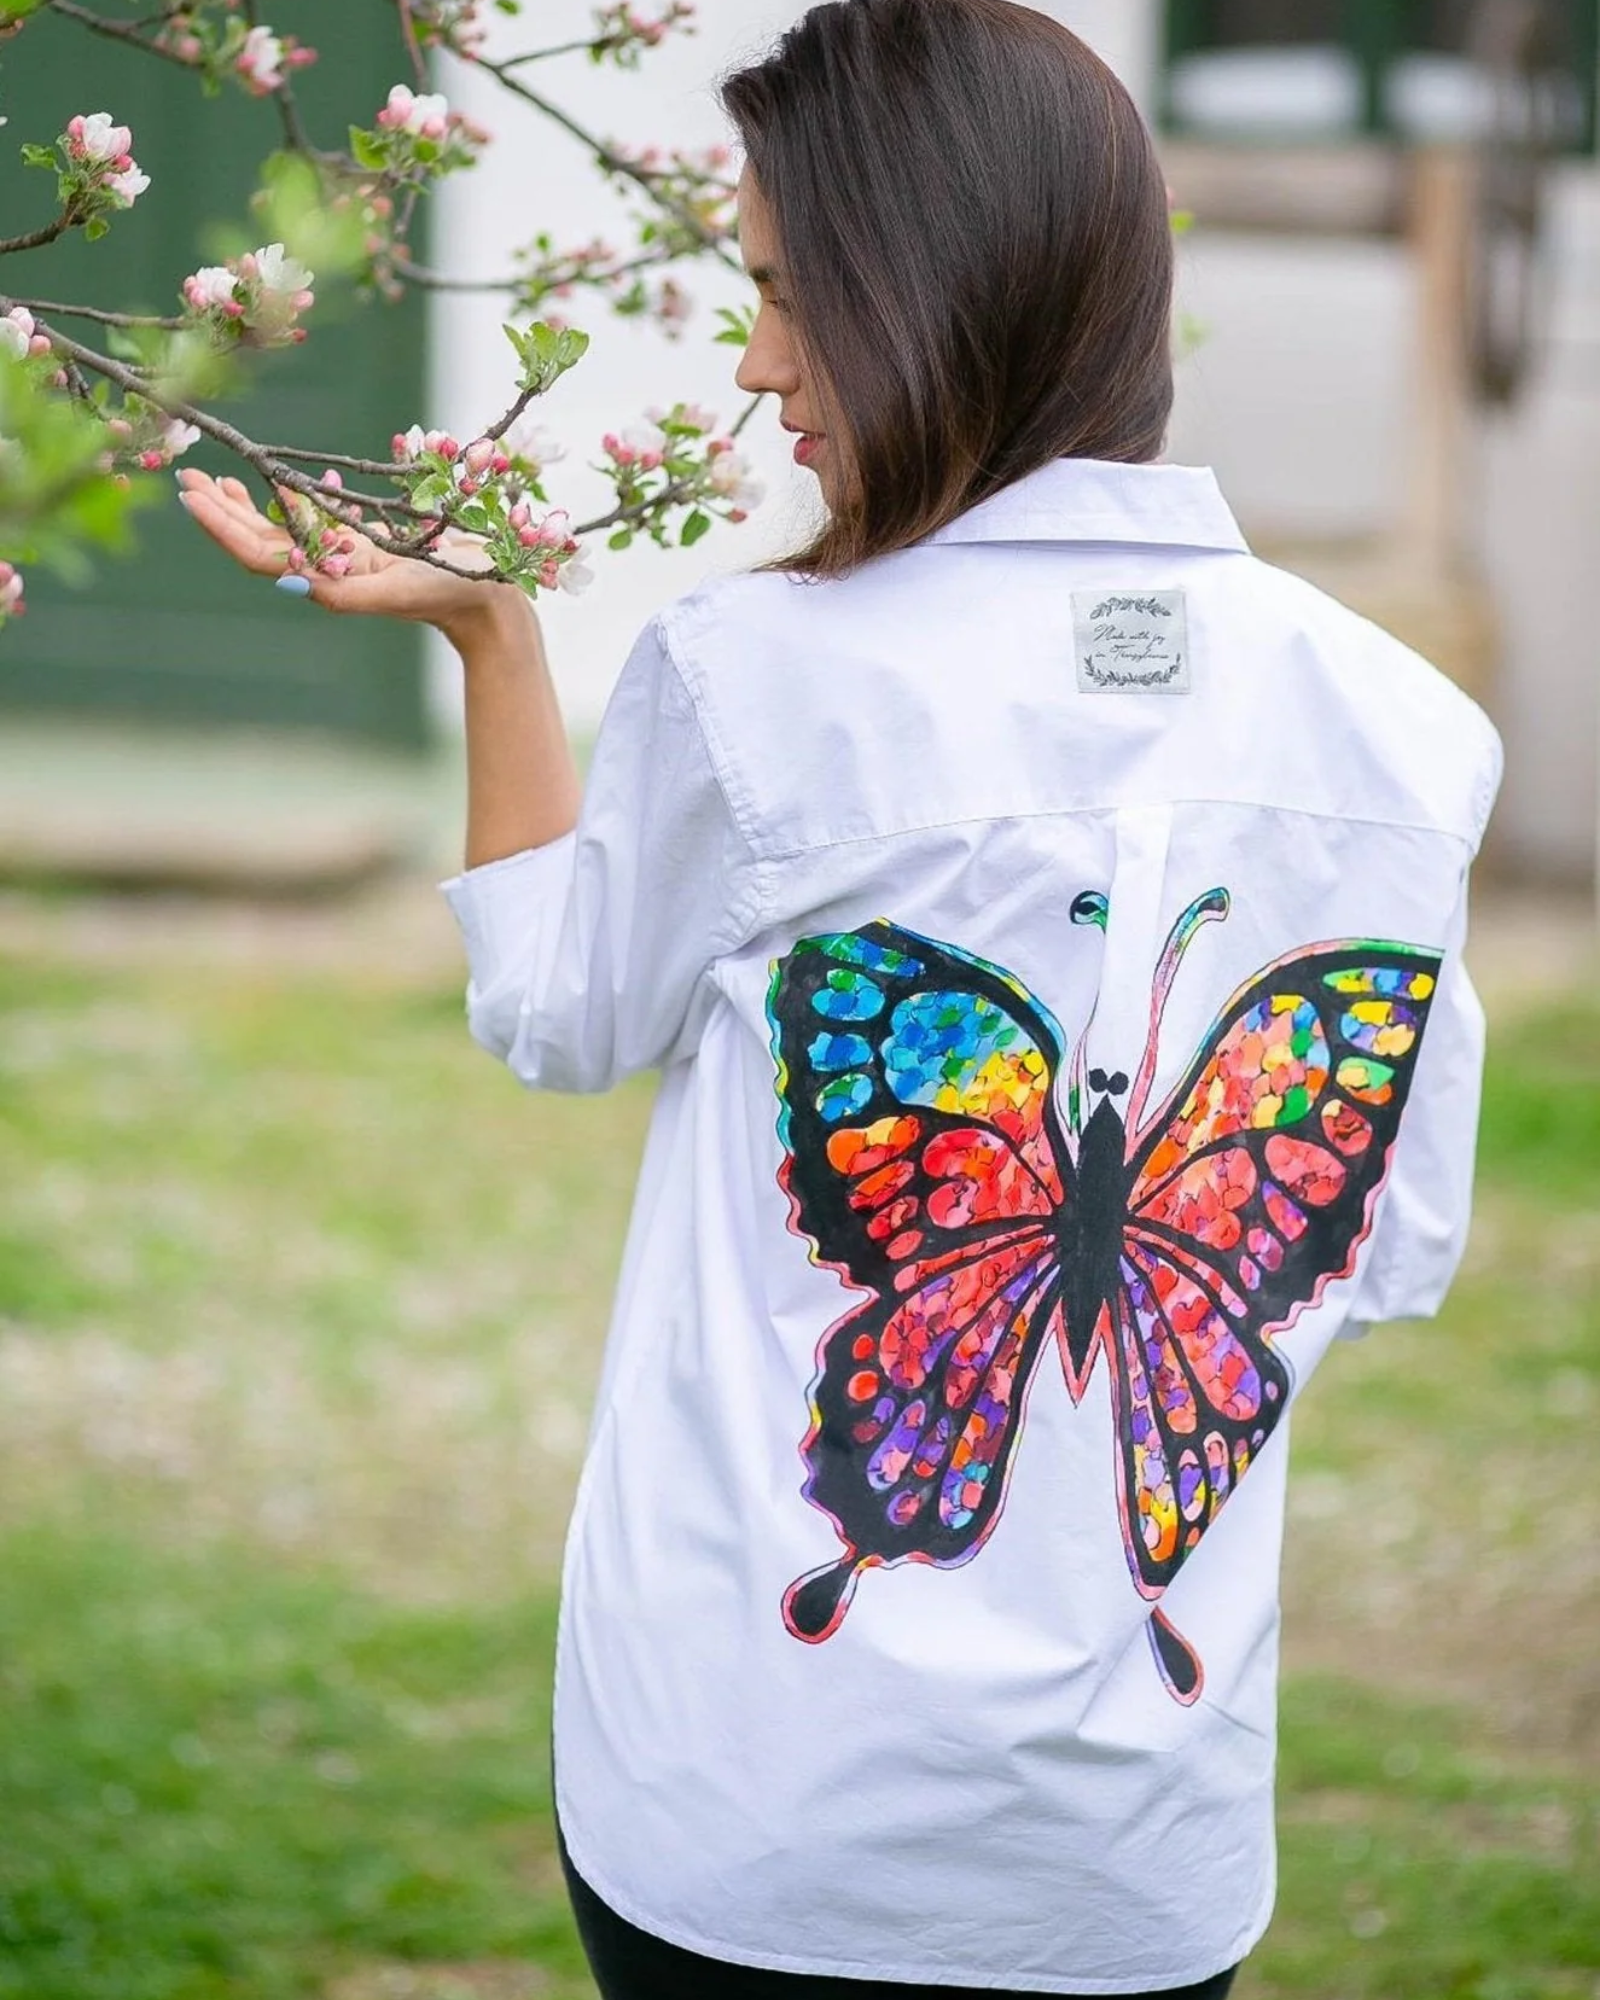 "Colorful butterfly" hand-painted women's shirt